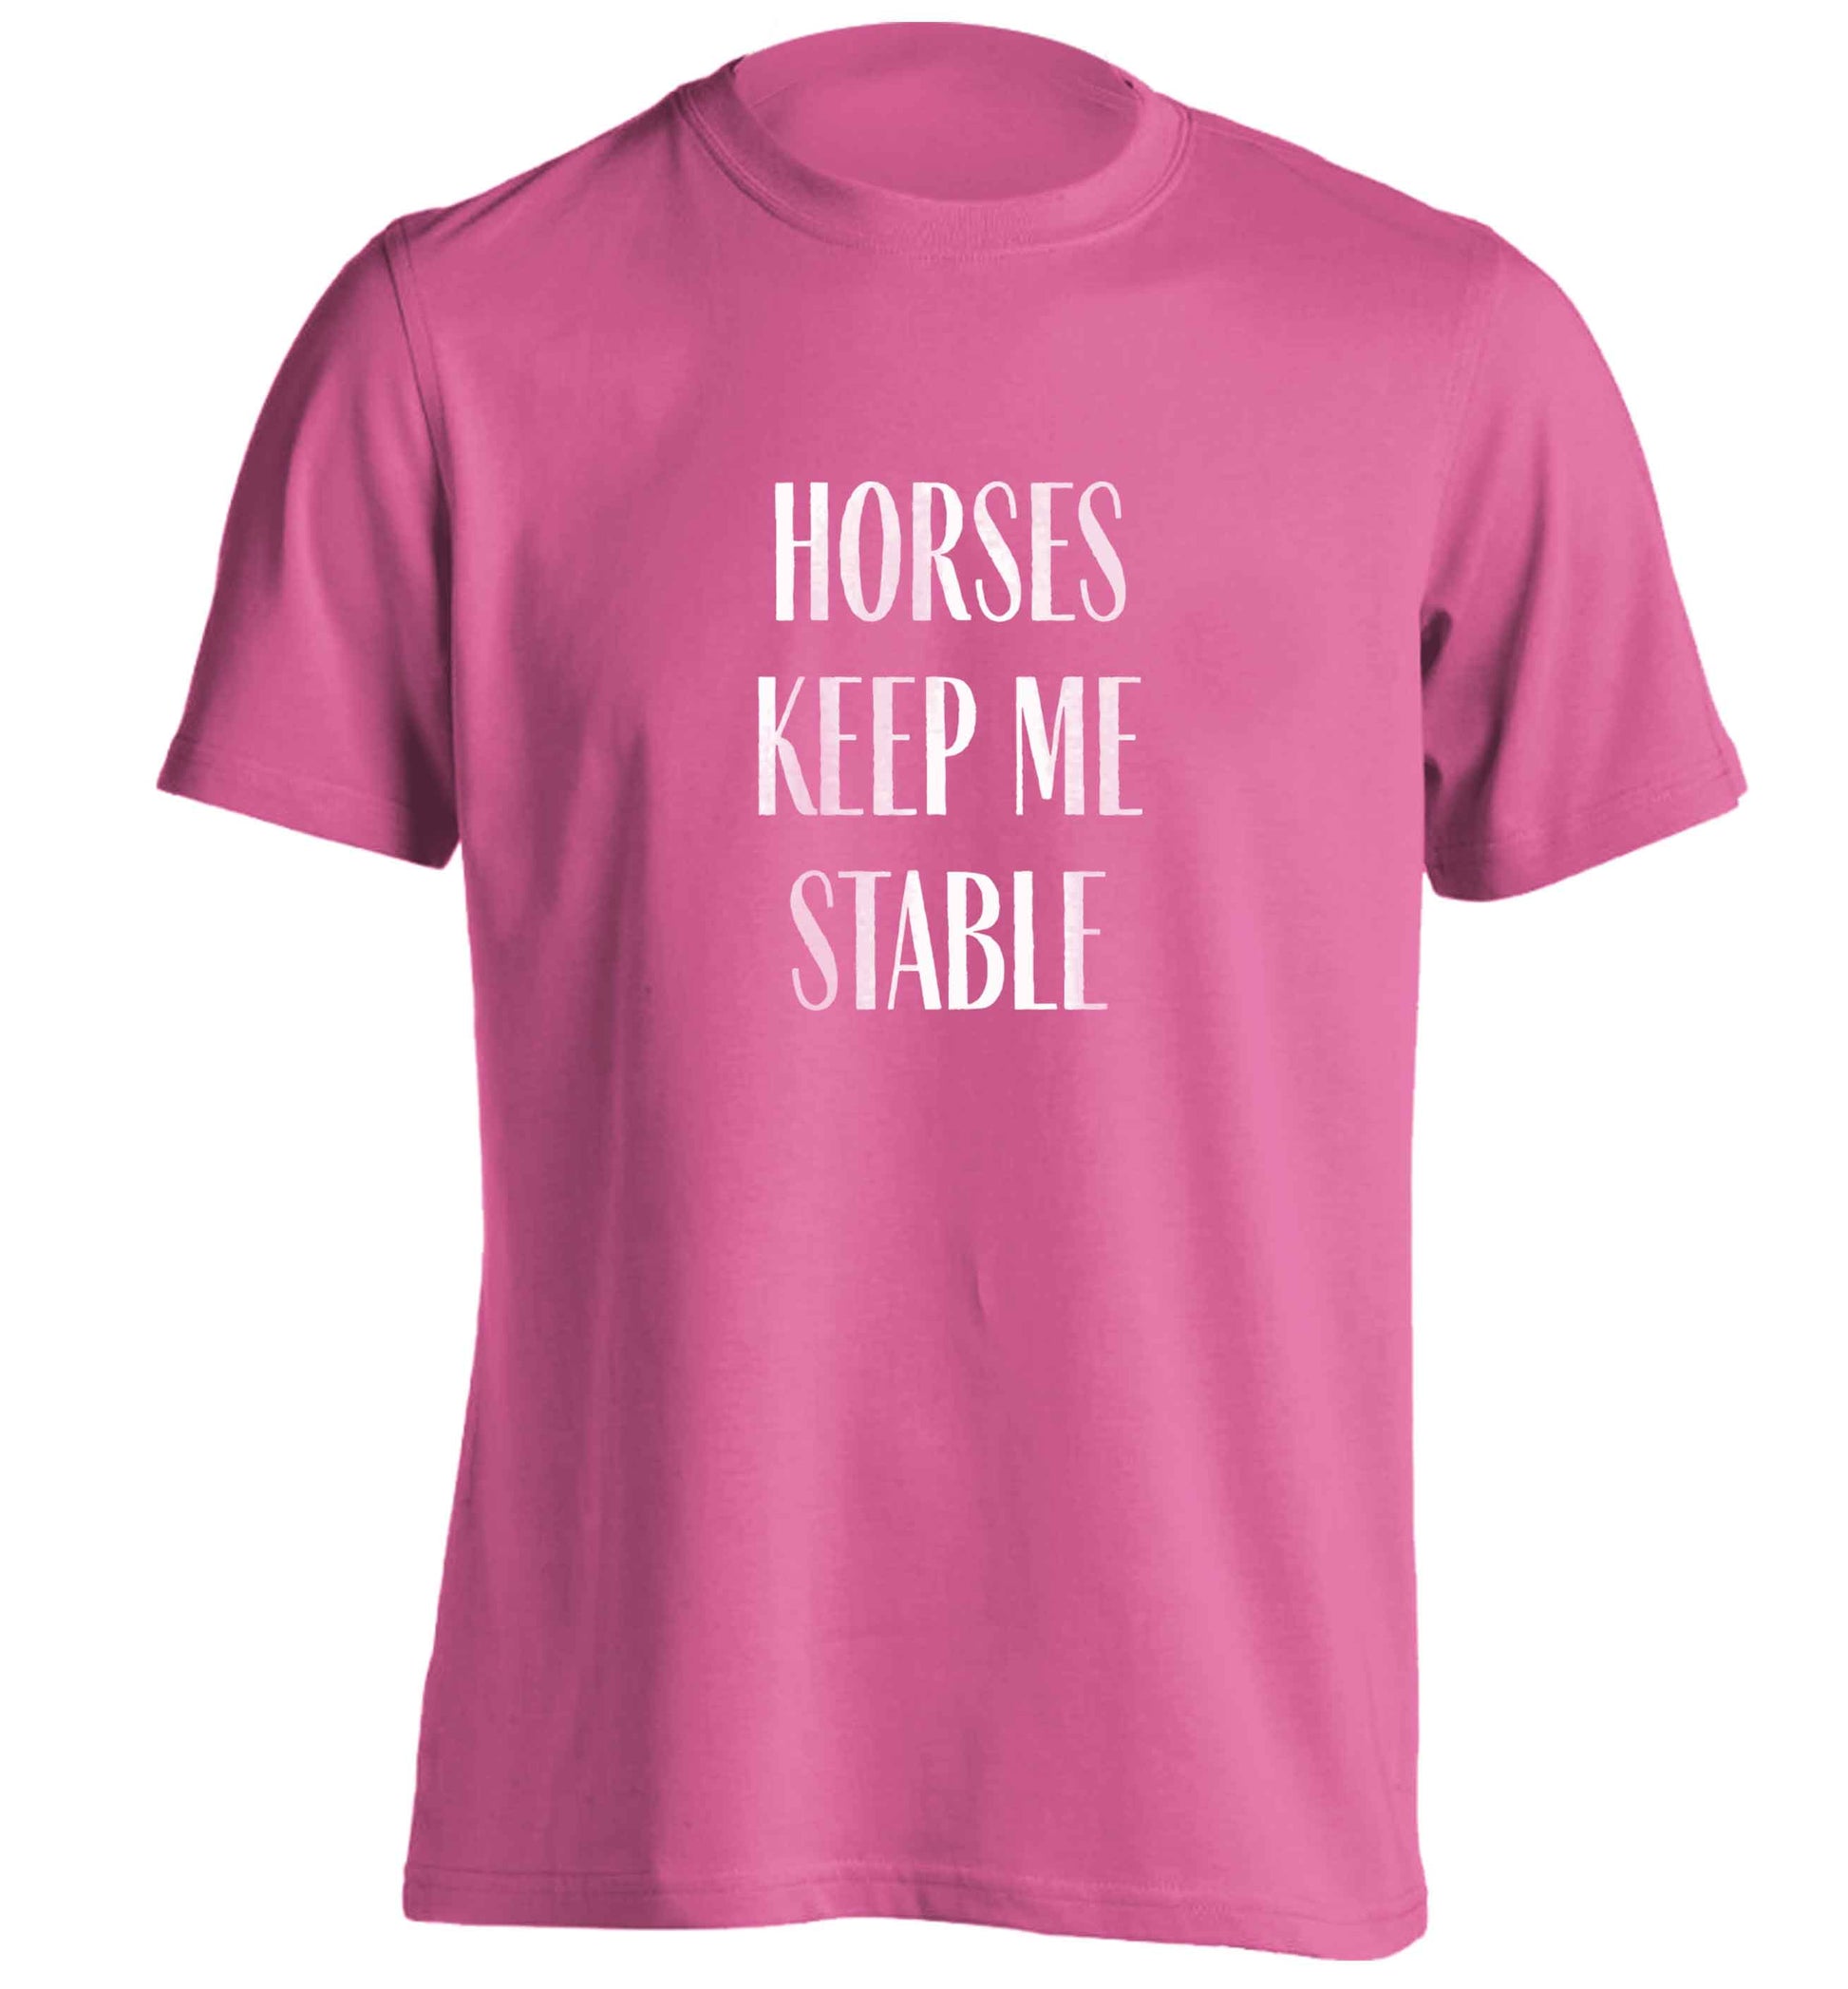 Horses keep me stable adults unisex pink Tshirt 2XL